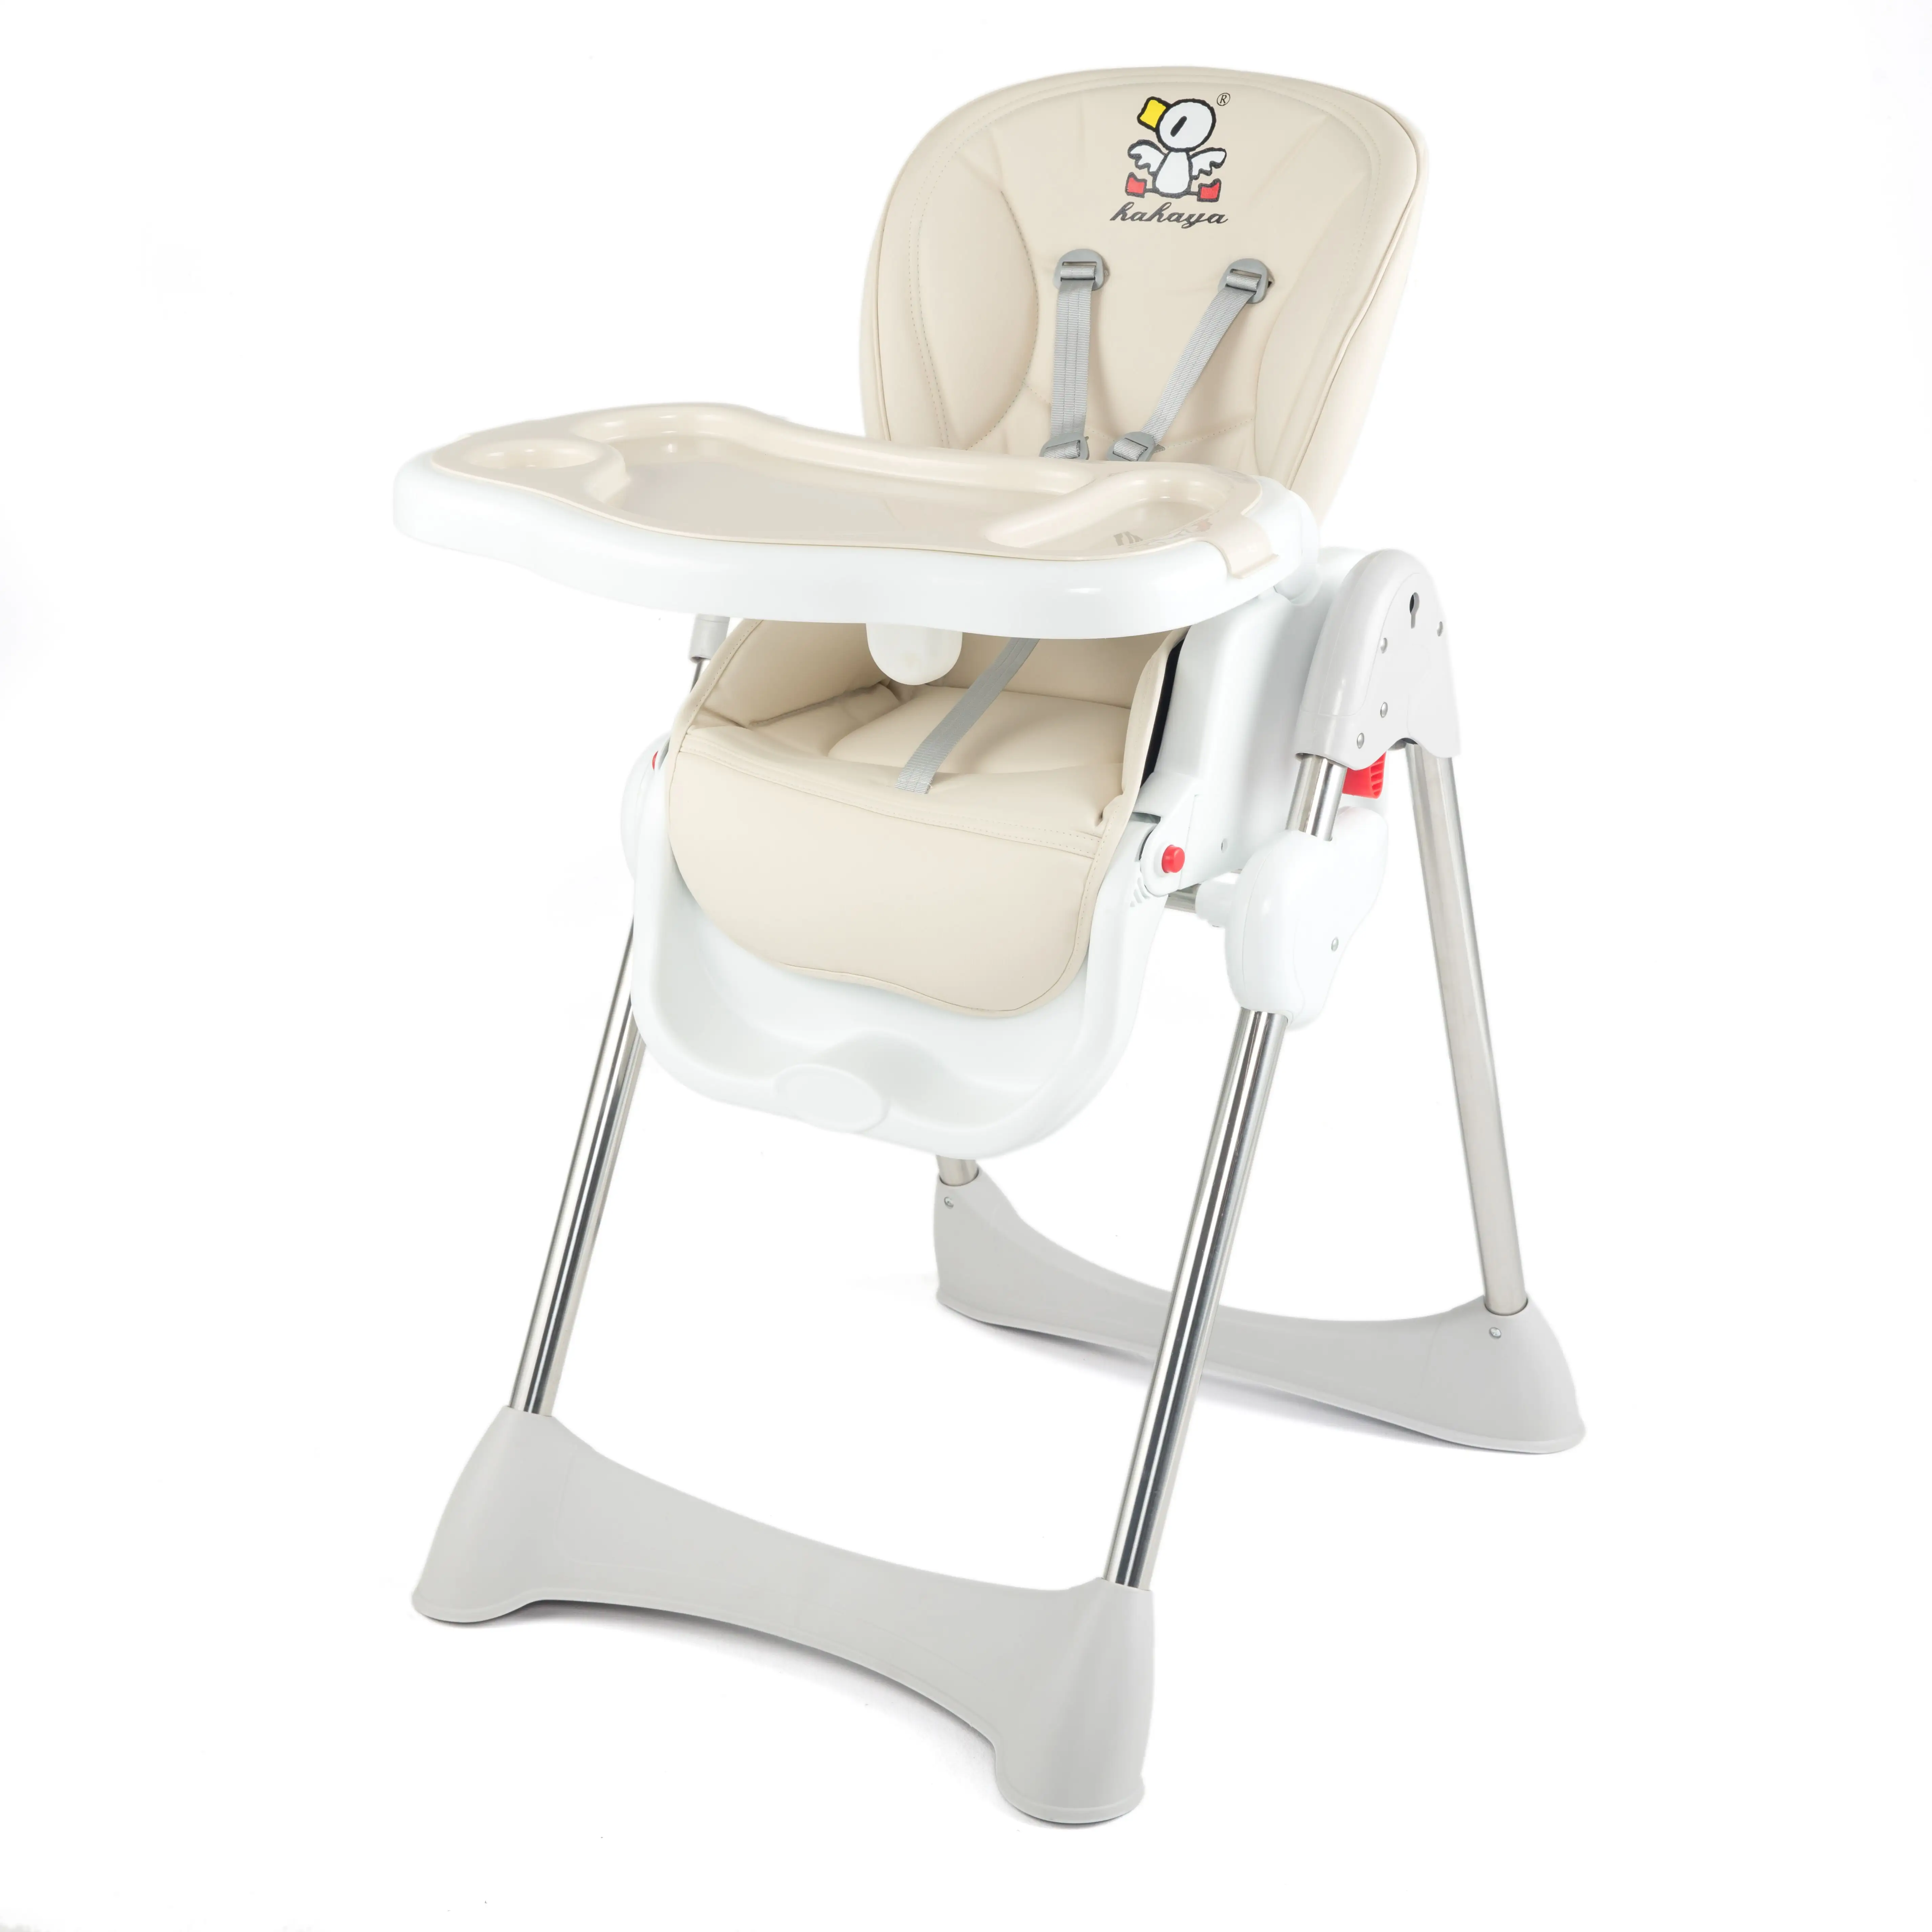 Factory selling kids booster seat chair baby eating high chair for infant feeding